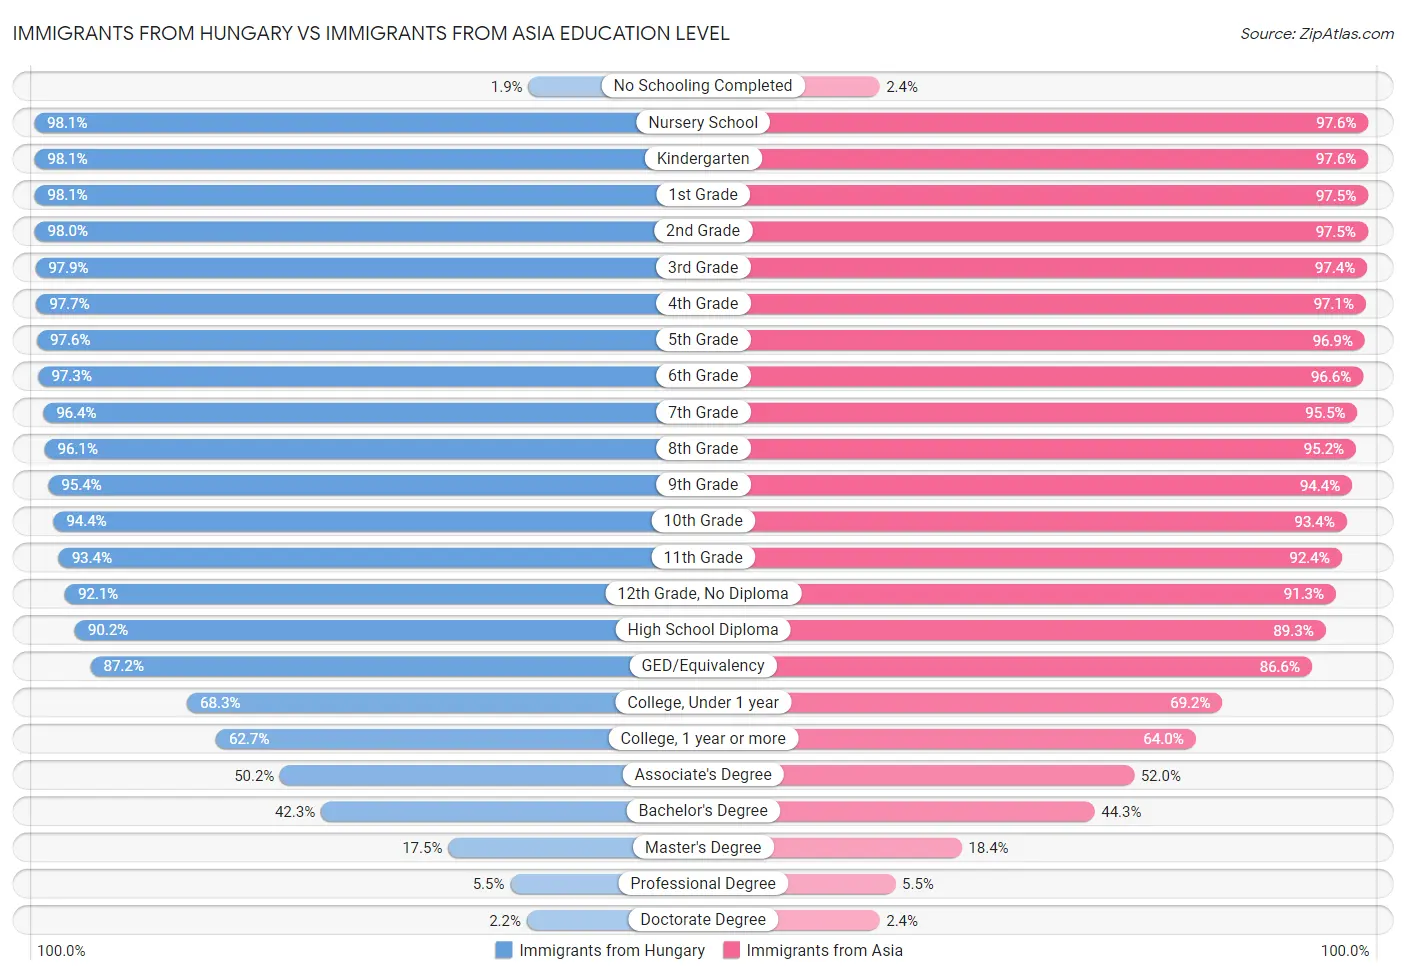 Immigrants from Hungary vs Immigrants from Asia Education Level